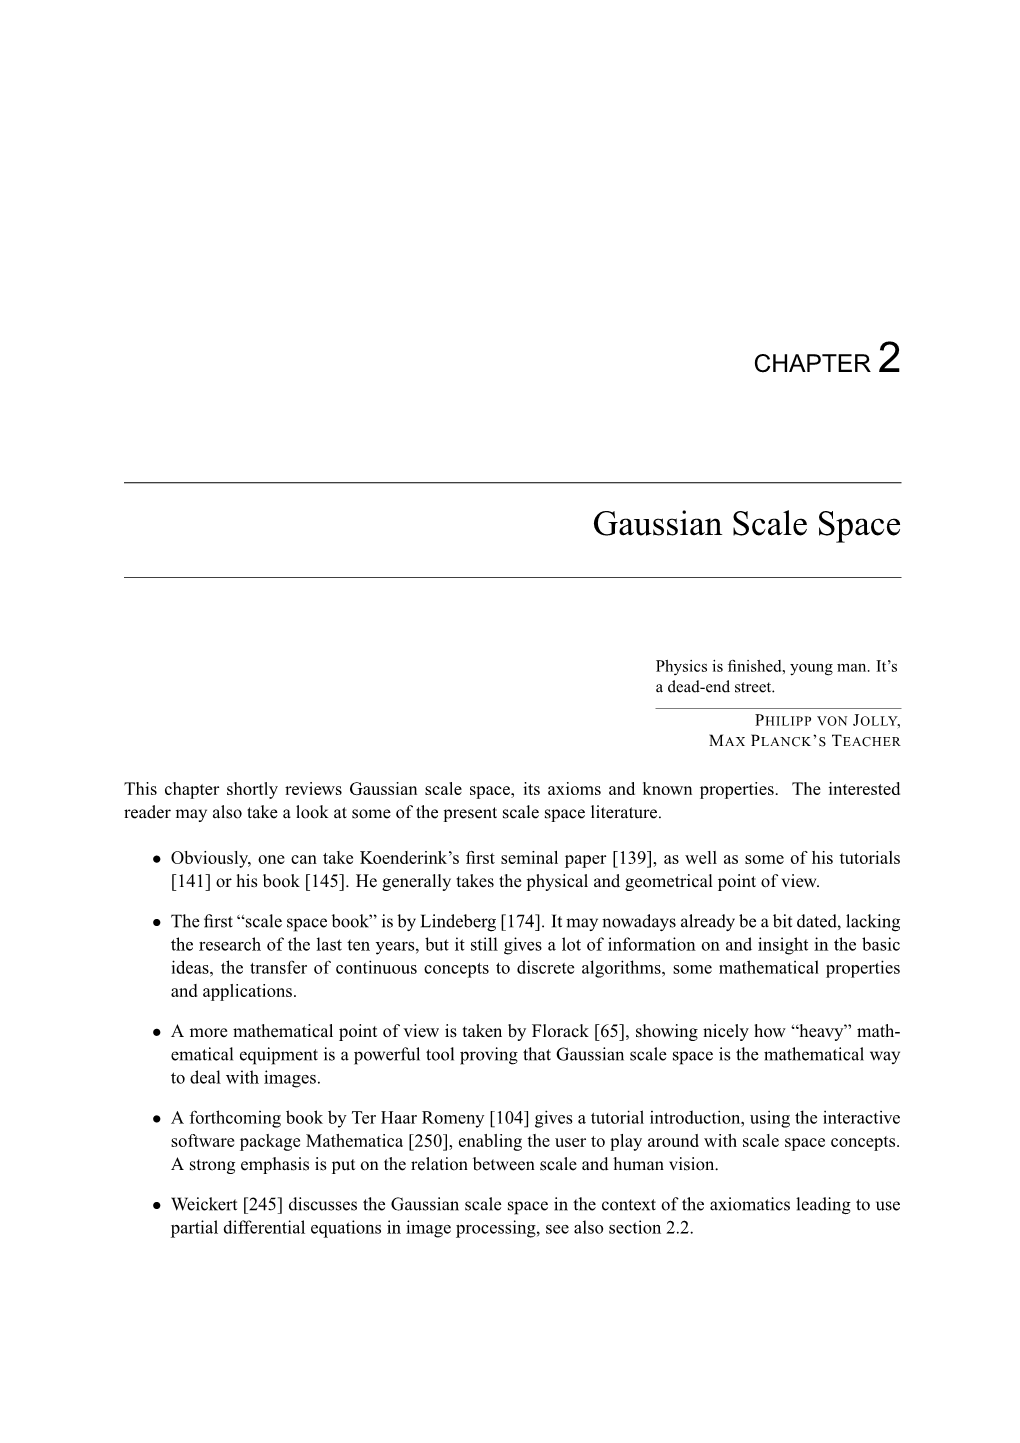 Gaussian Scale Space